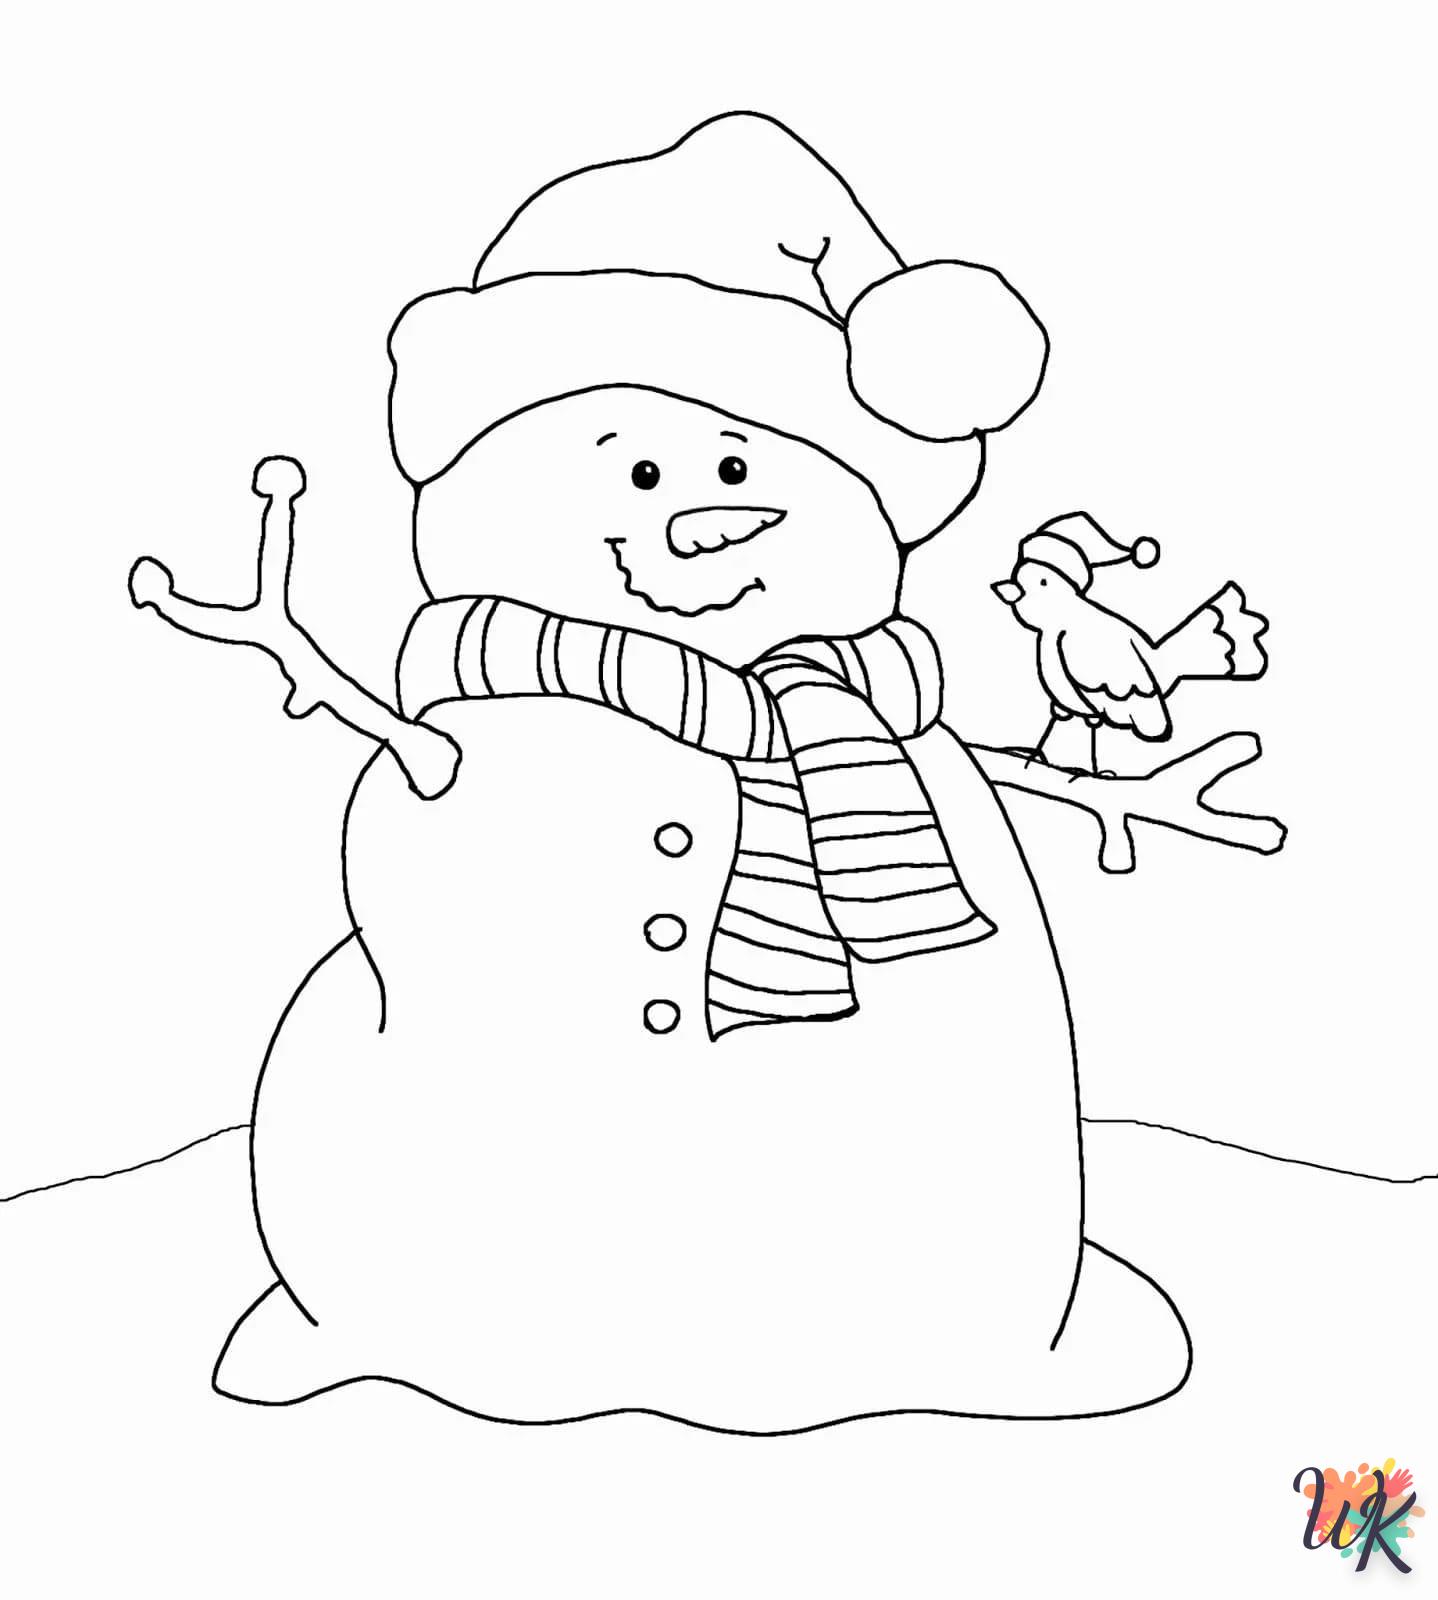 Snowman coloring page to print for 3 year olds